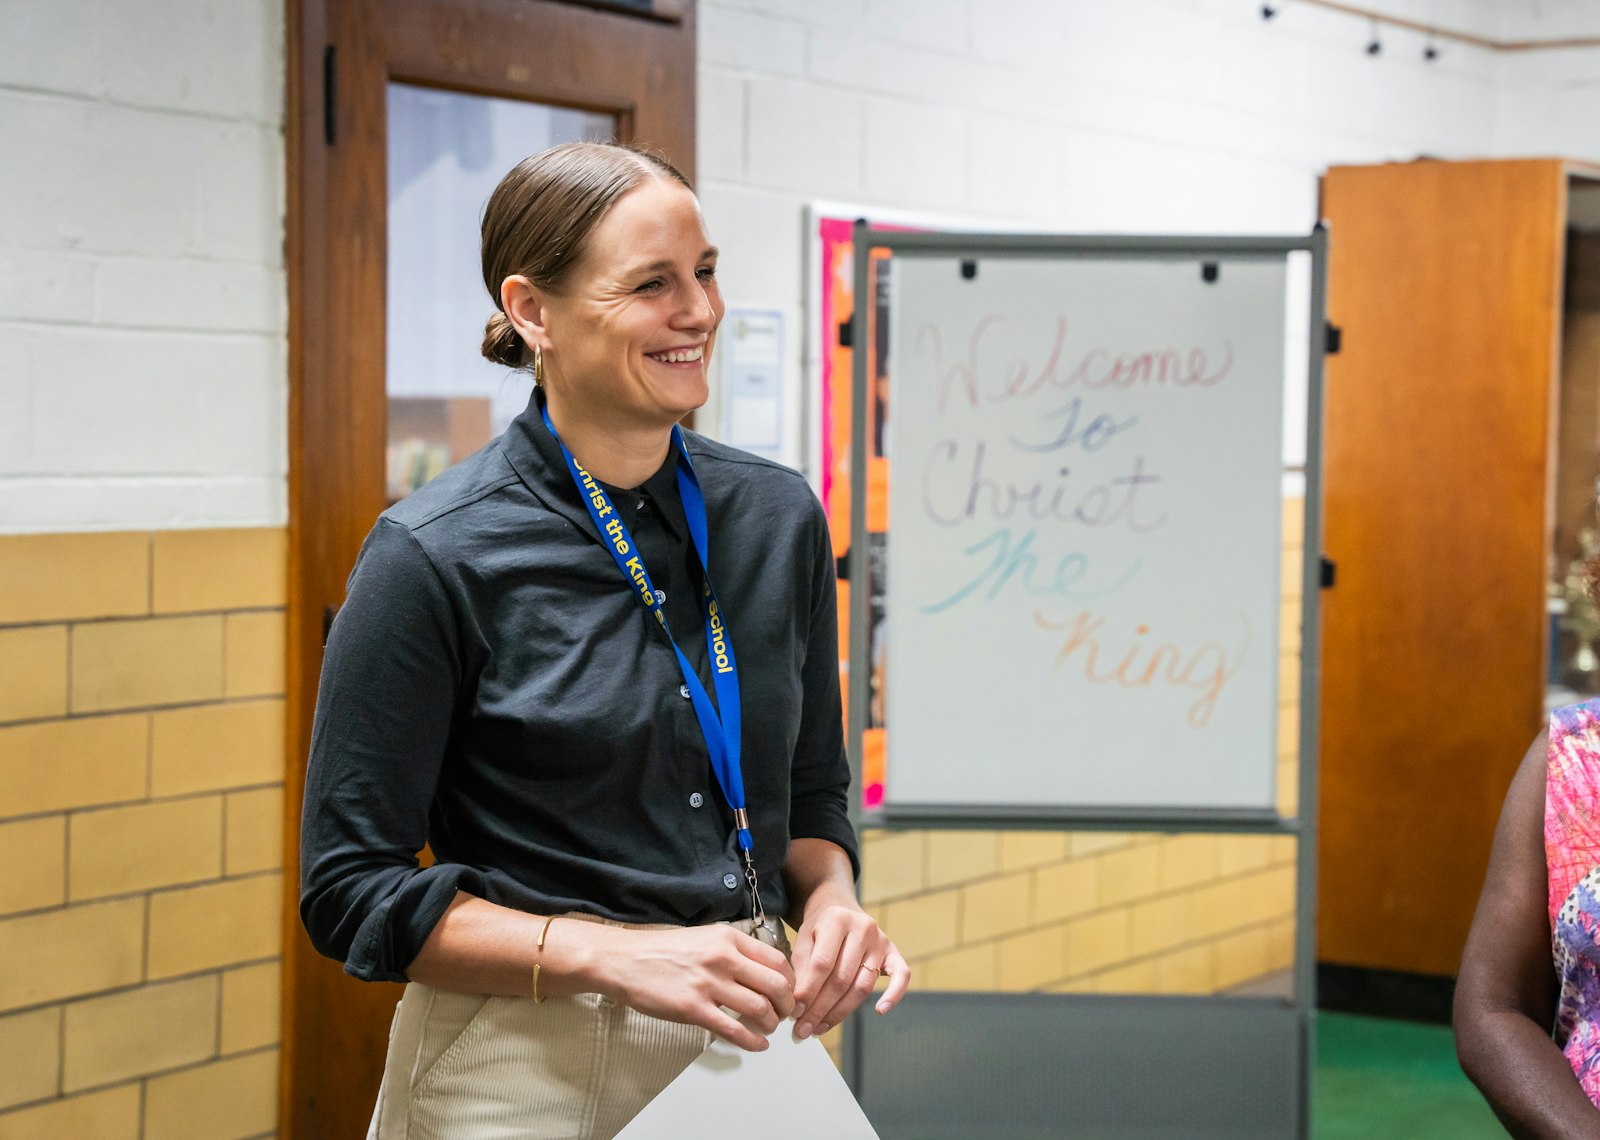 Culkowski comes to Christ the King from Chicago, where she worked 10 years as a teacher and administrator in both charter and Archdiocese of Chicago schools.